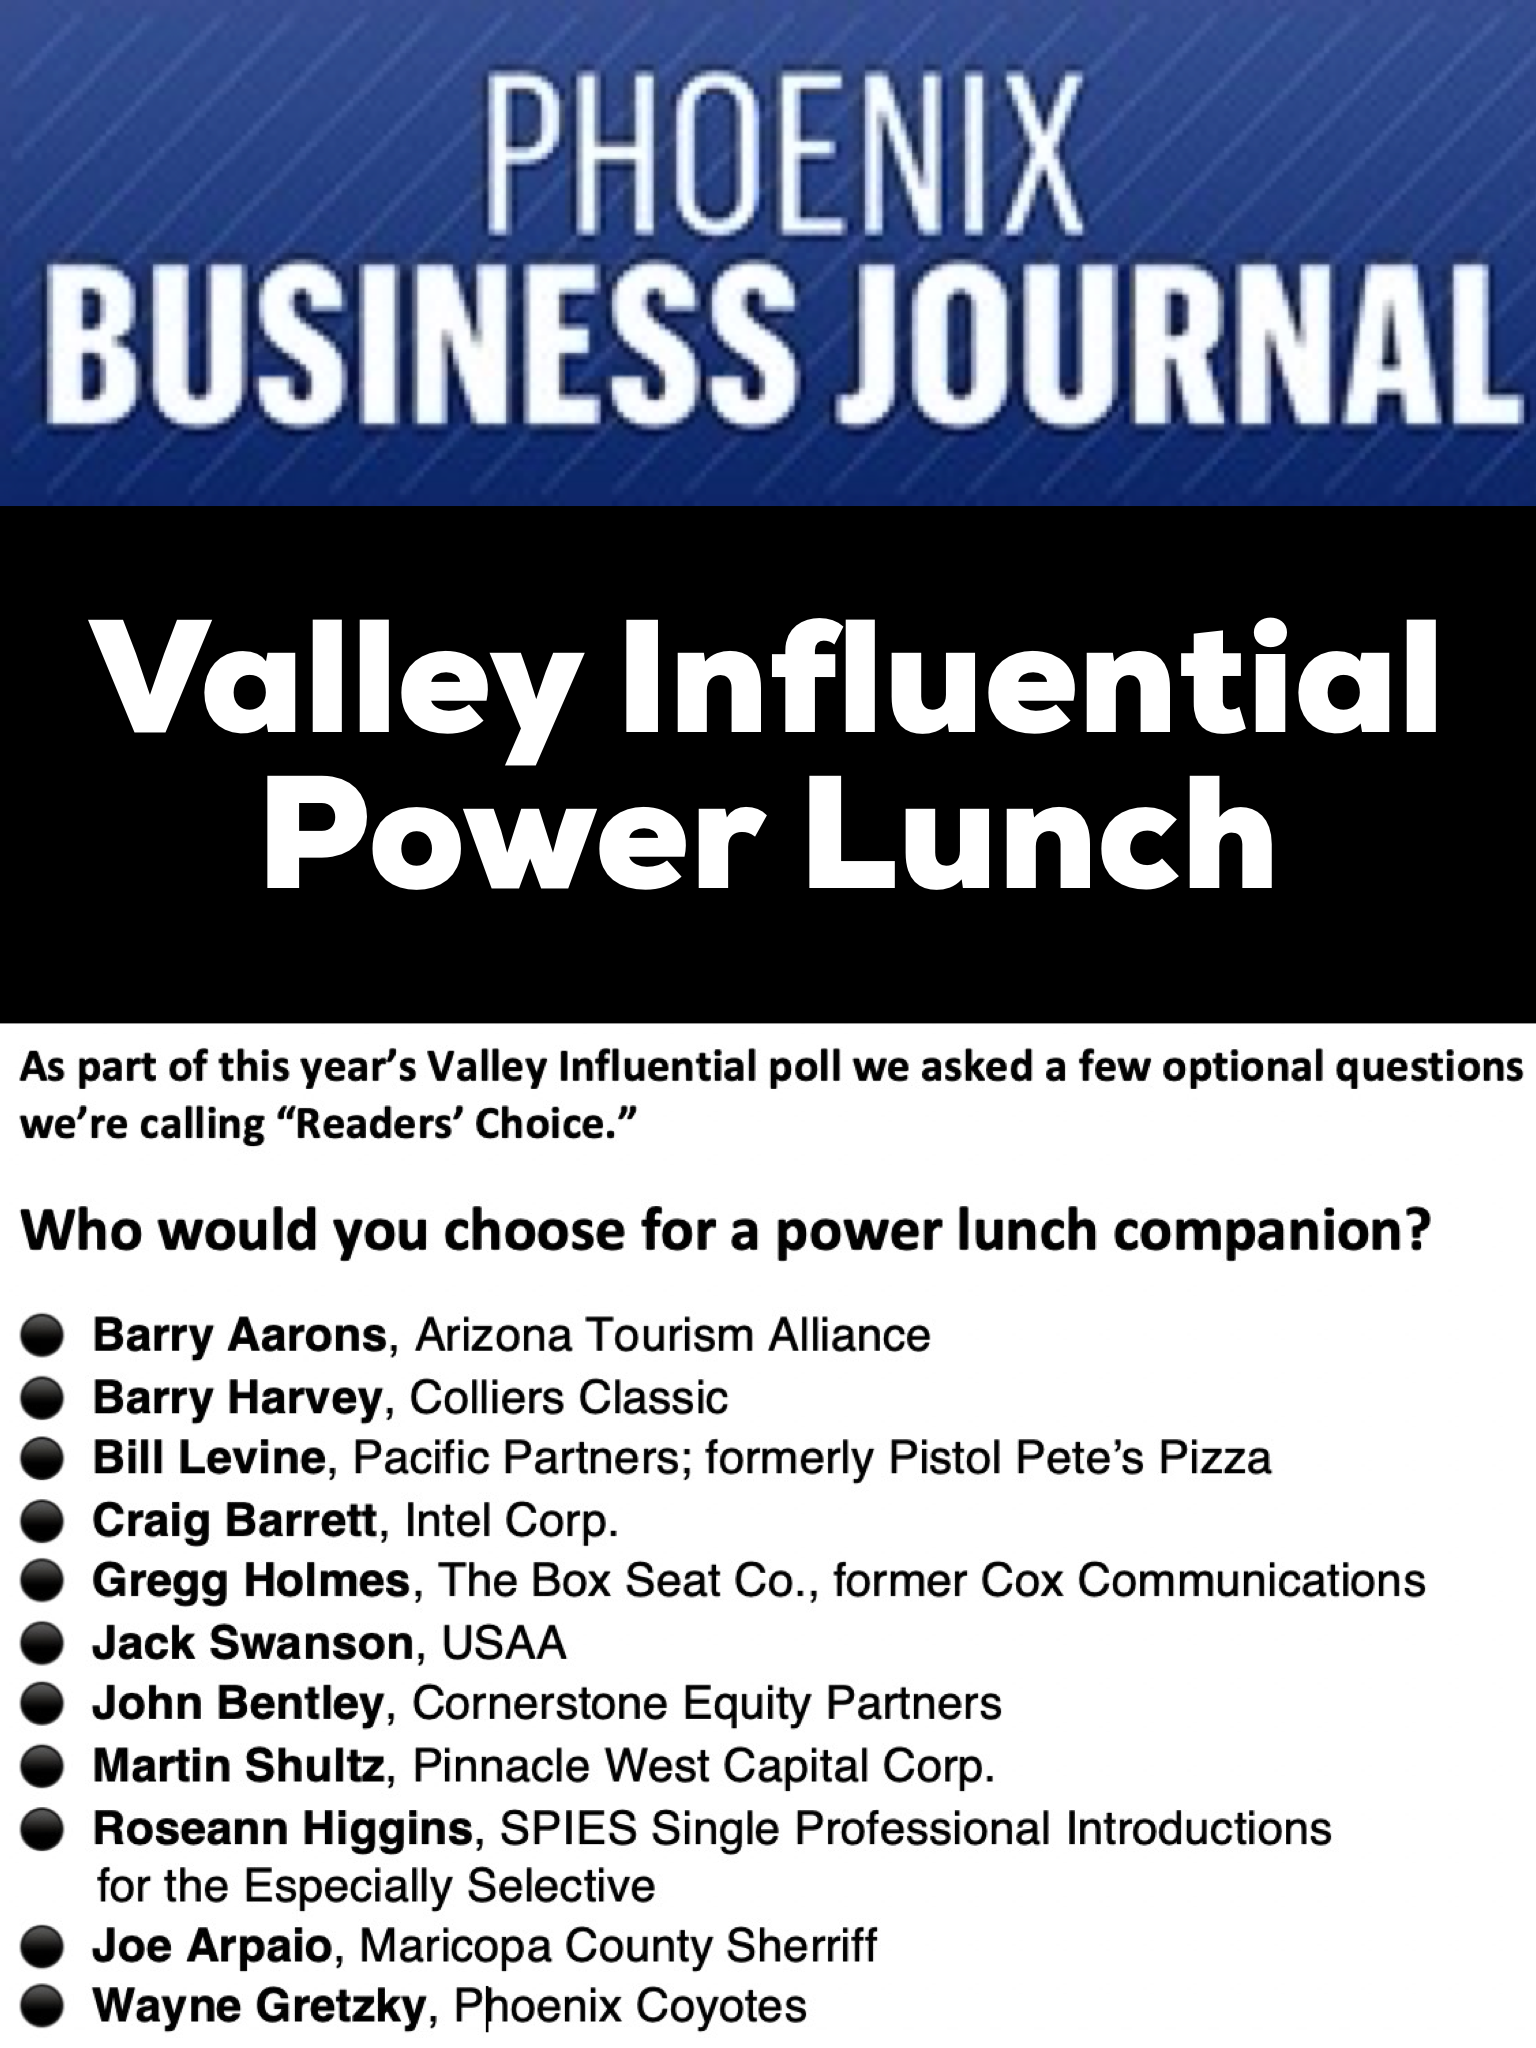 Phoenix Business Journal, Valley Influential, Power Lunch, Wayne Gretzky, Phoenix Coyotes, Roseann Higgins, matchmaker, President, SPIES, Single Professional Introductions for the Especially Selective, entrepreneurs, CEOs, Craig Barrett, investors, owners, Arizona